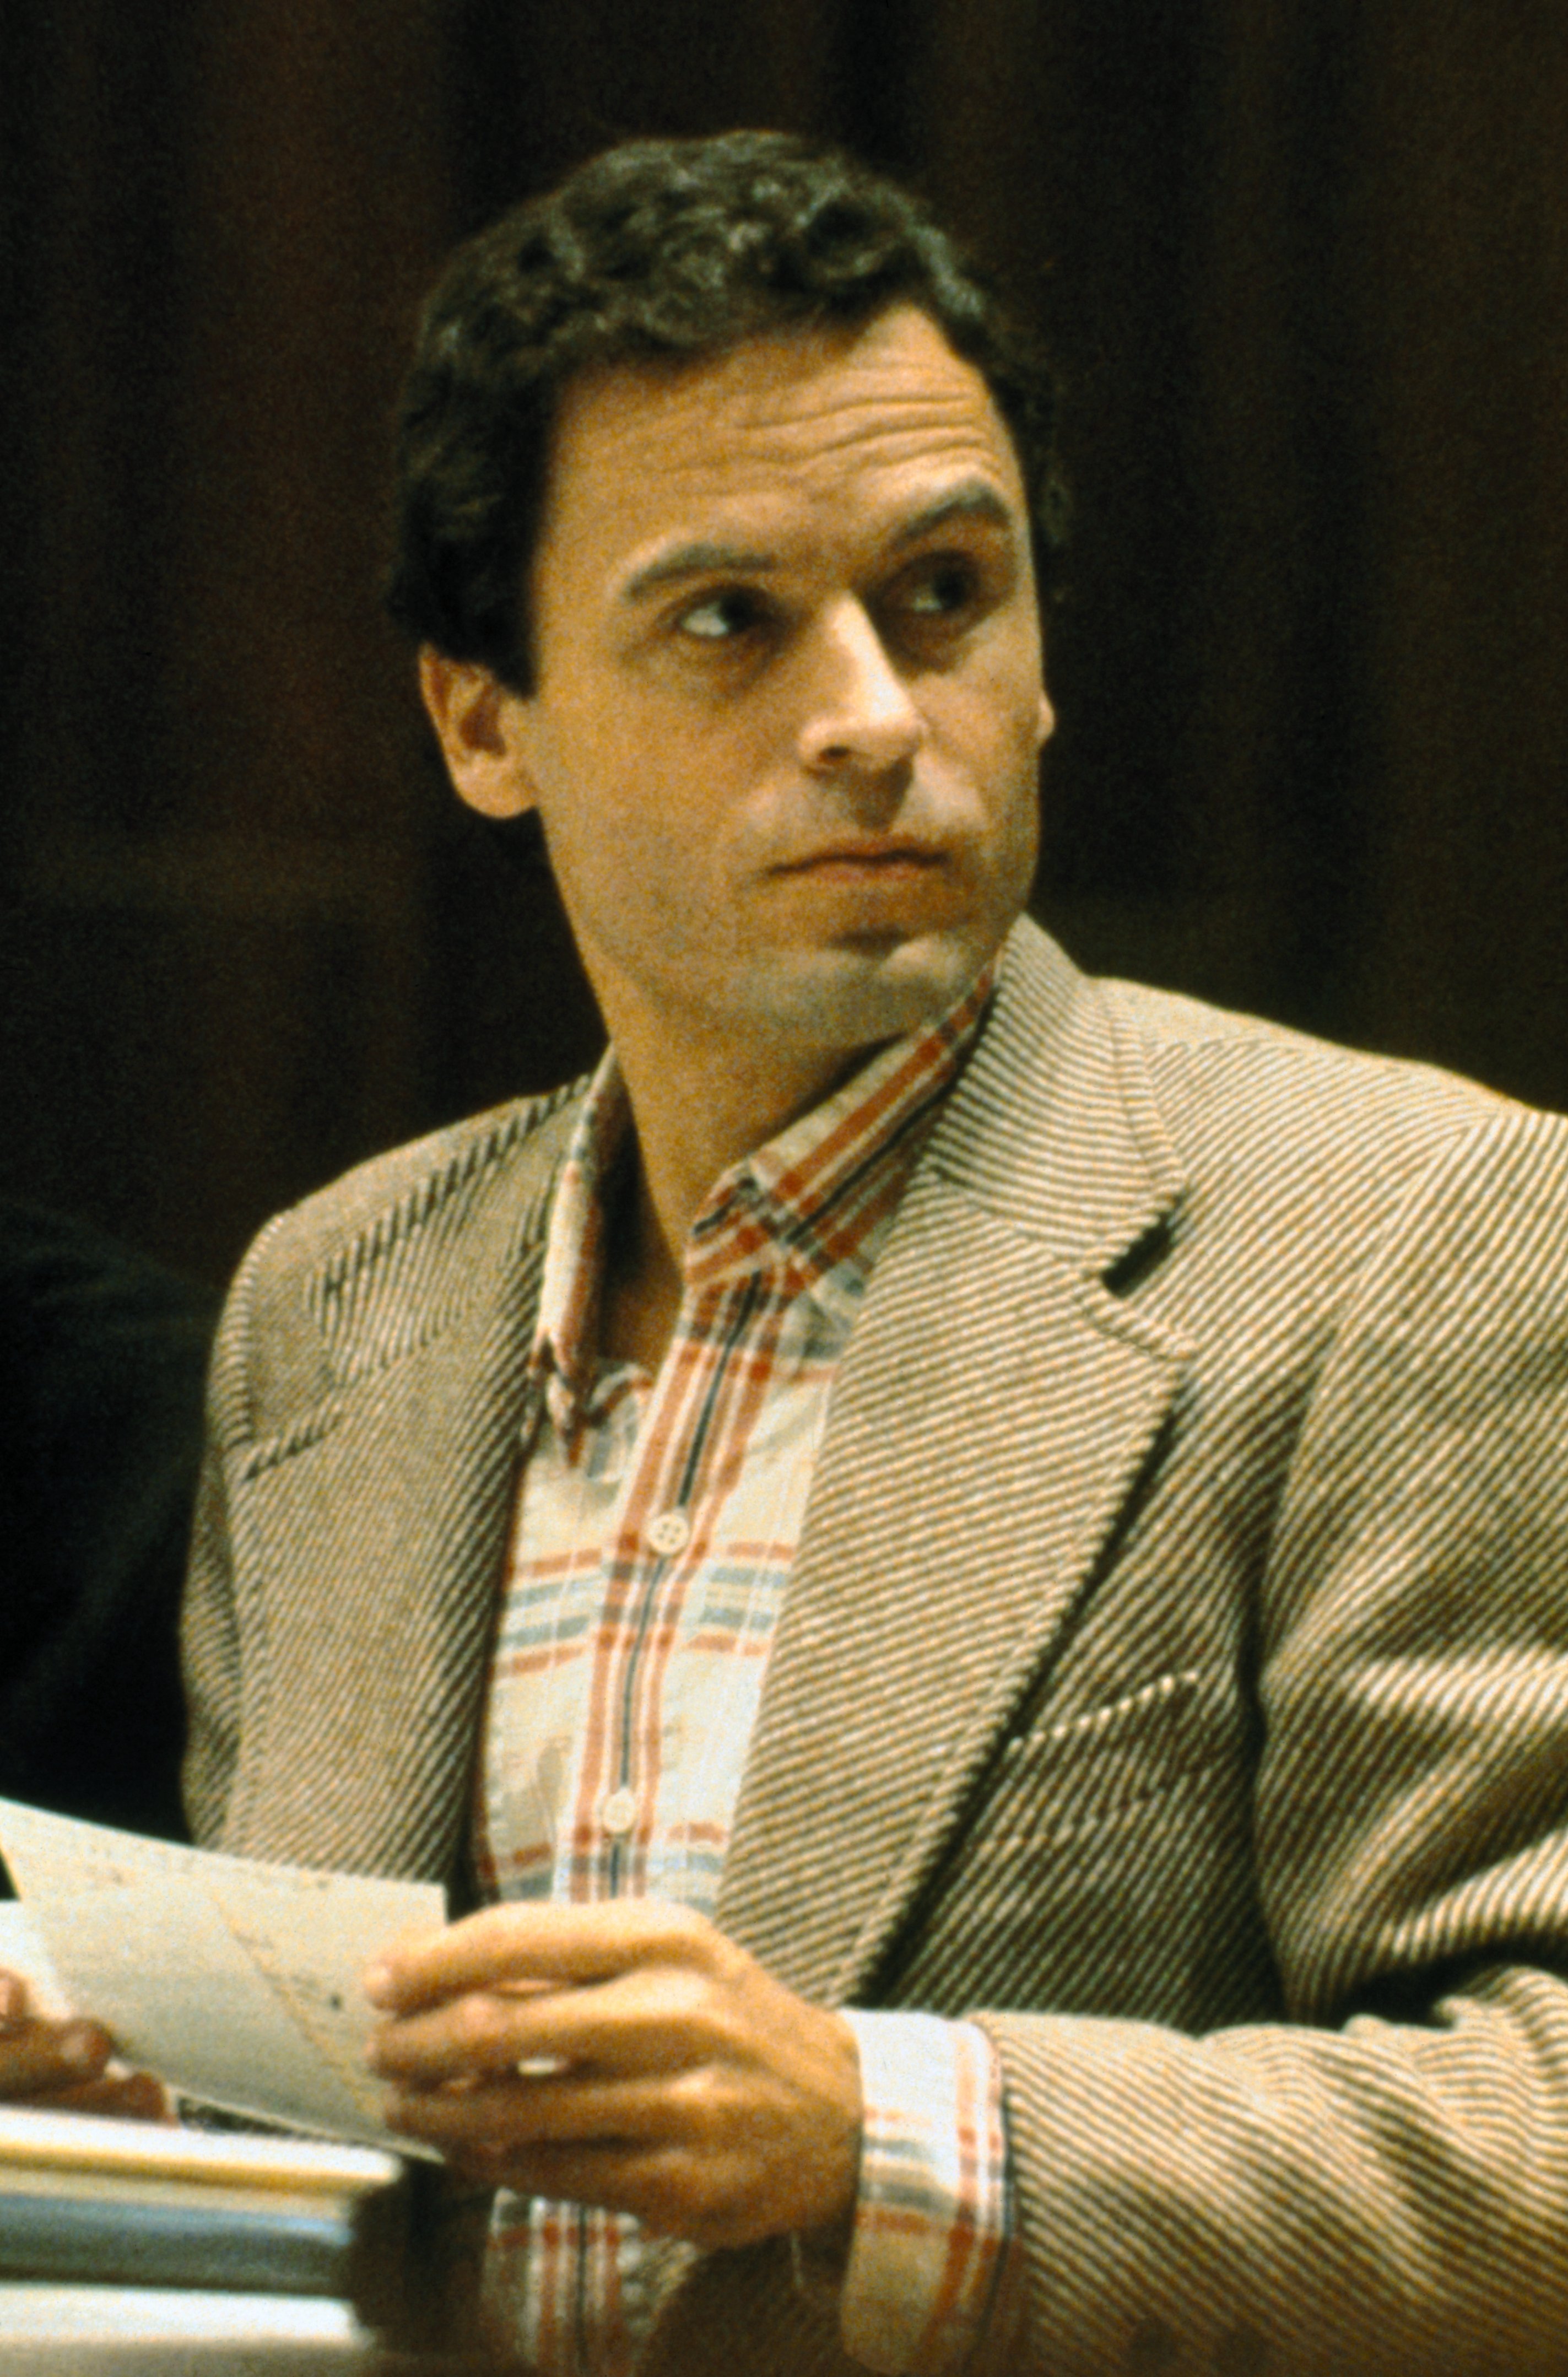 Photo of Ted Bundy in court on January 1, 1979 | Source: Getty Images